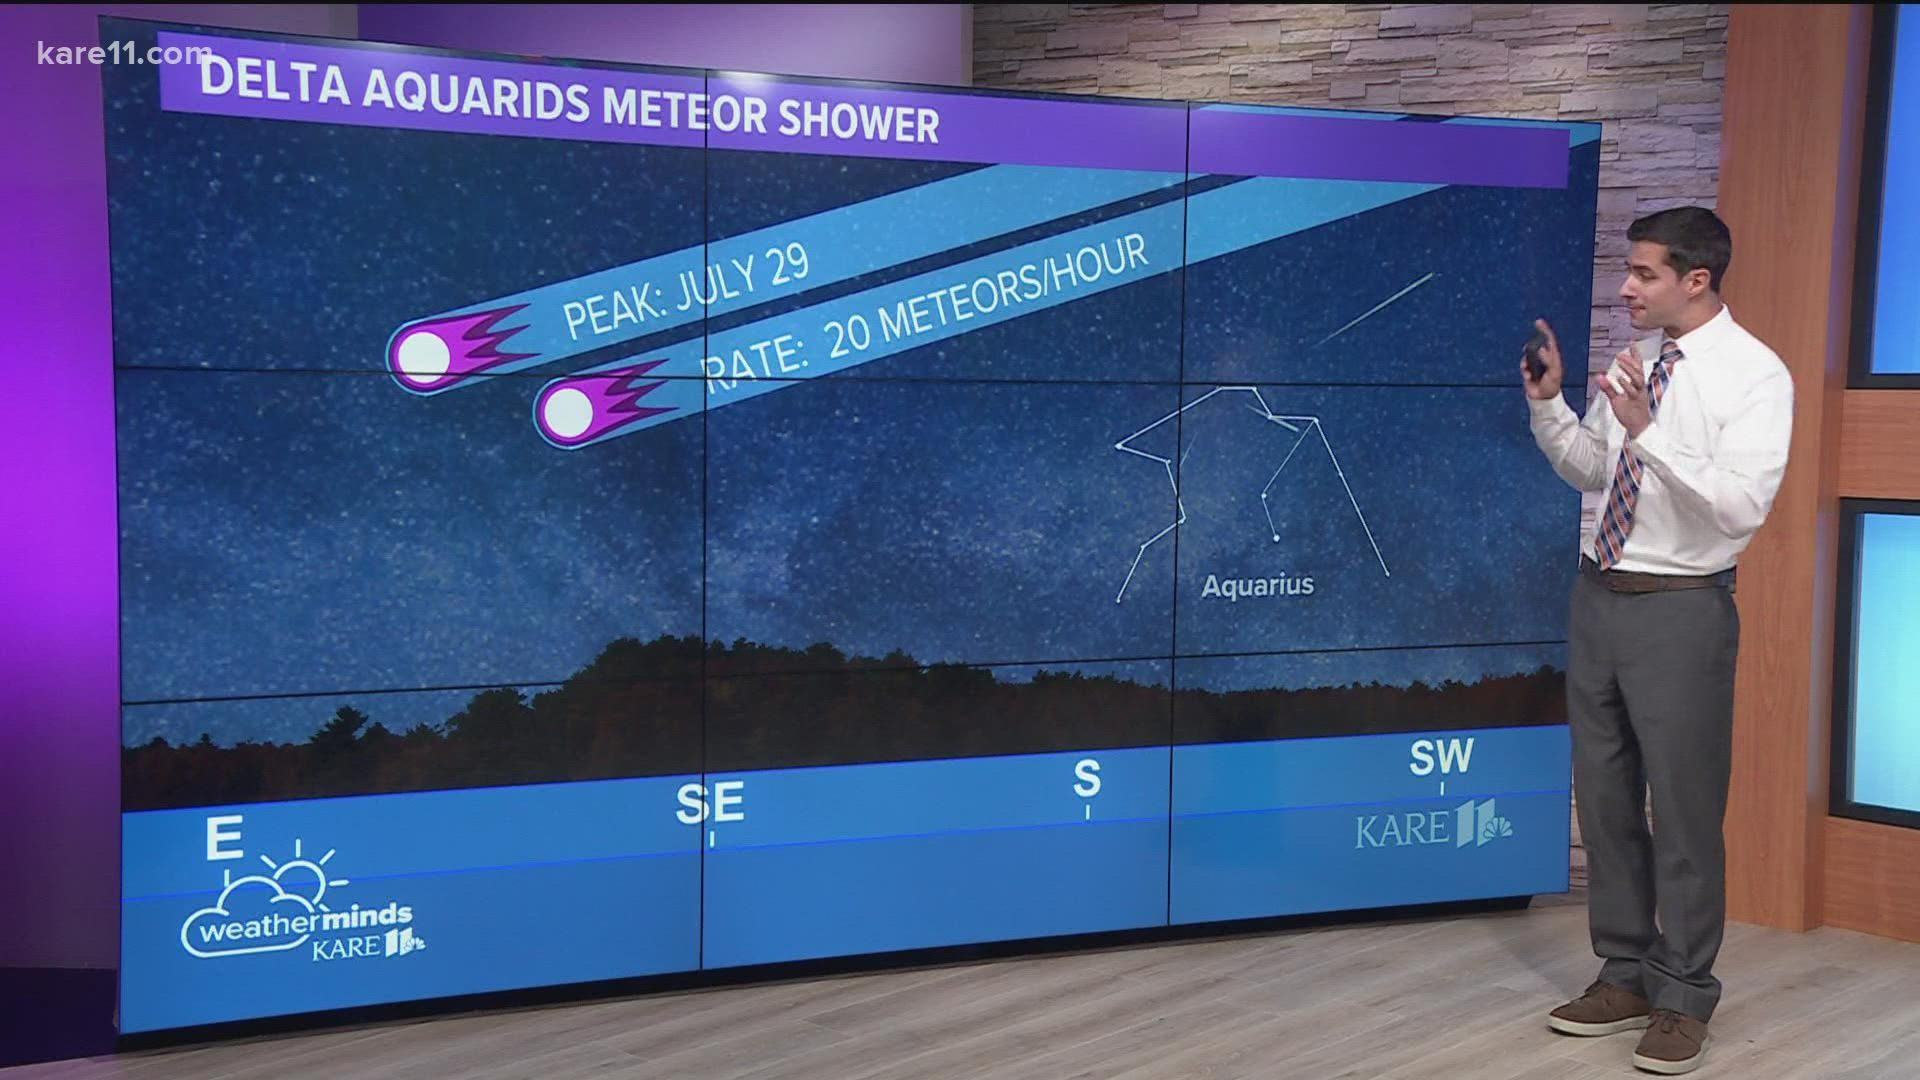 The Delta Aquariids meteor shower occurs annually from mid-July through most of August.